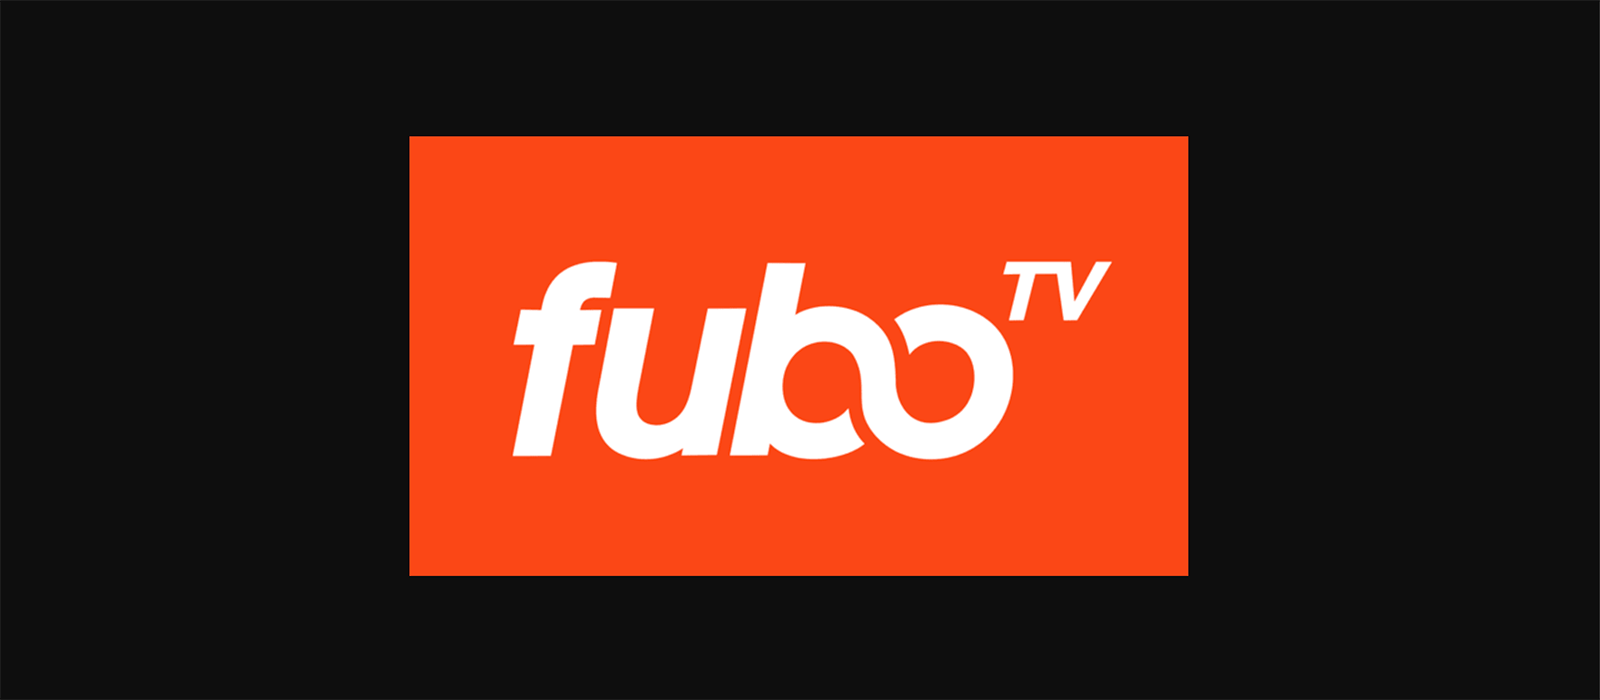 FuboTV; The Complete Guide to Channels, Cost, and How to Sign Up